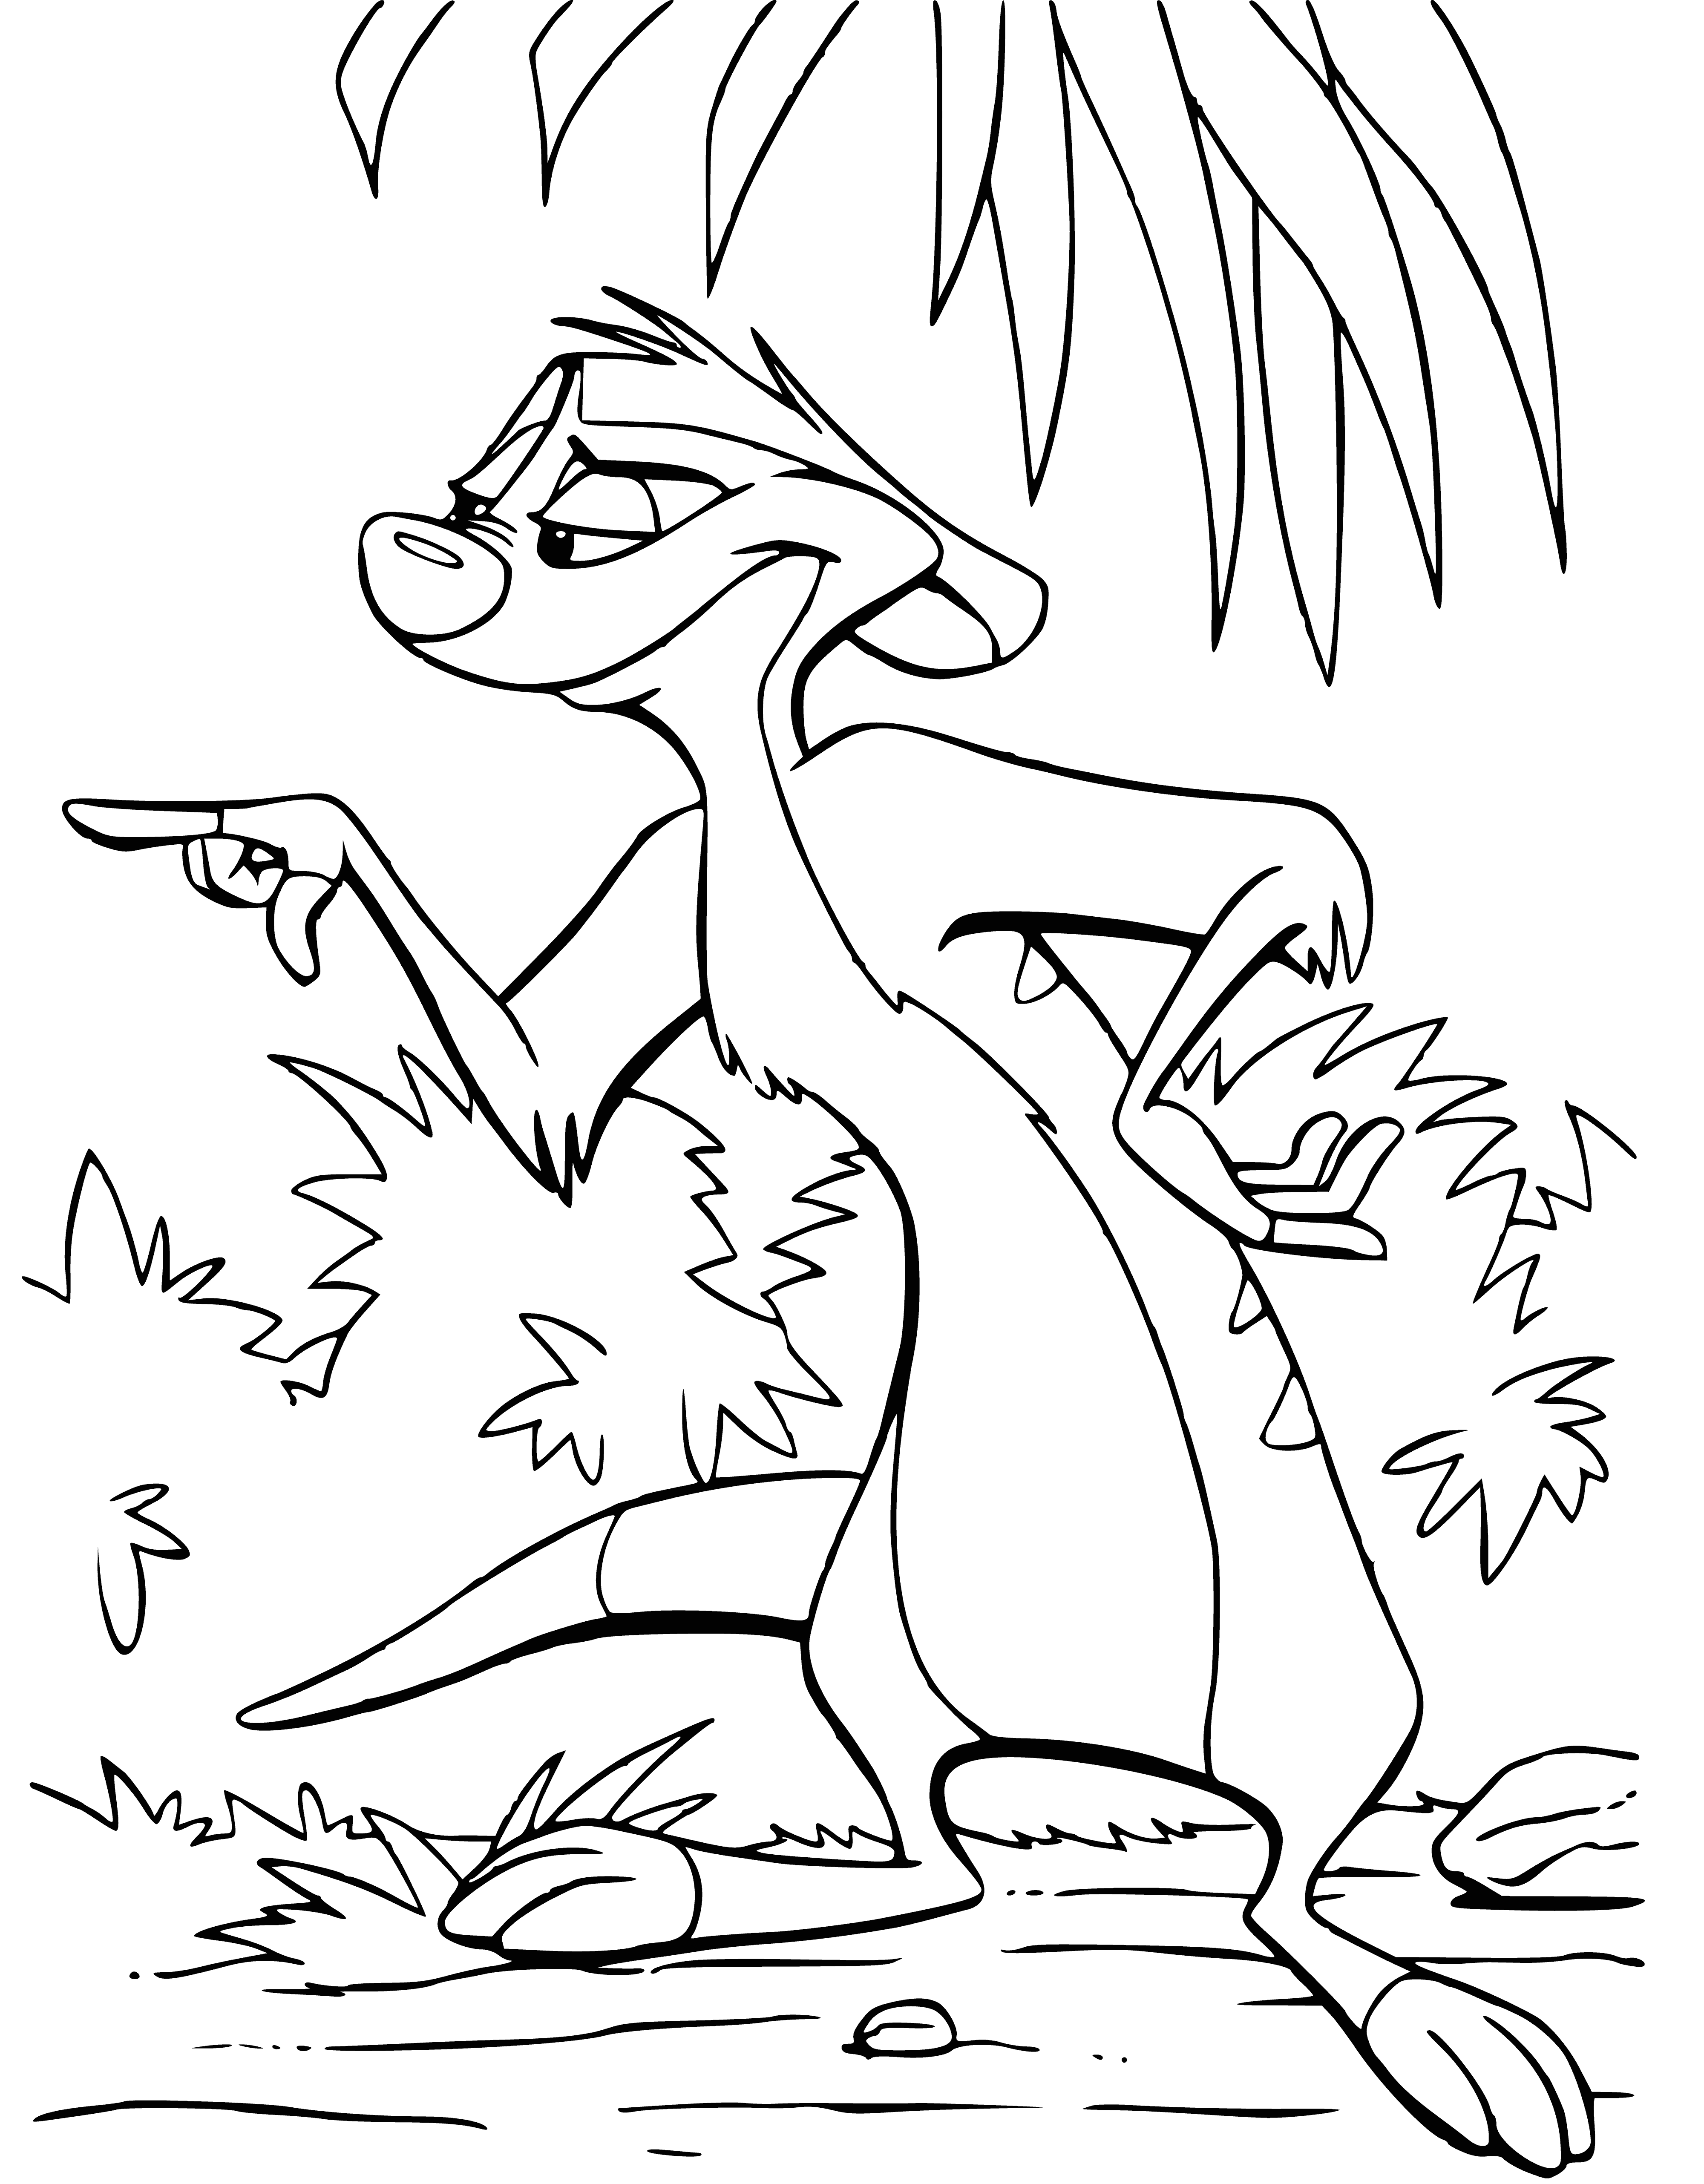 Timon coloring page